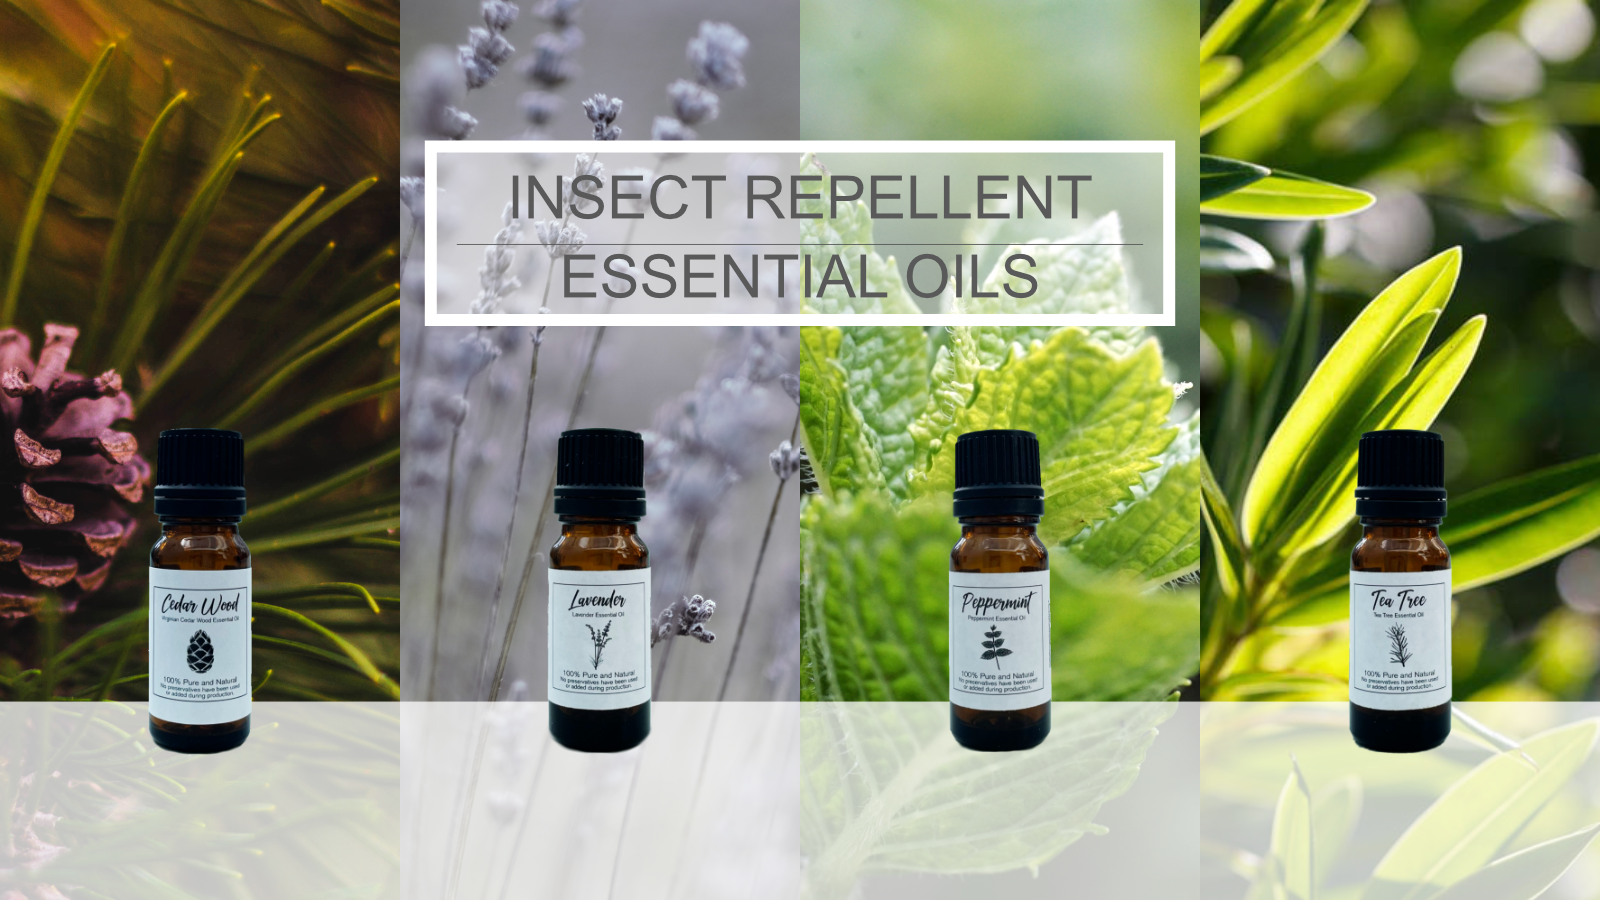 Essential Oils - Room fragrances with the added bonus of repelling insects.